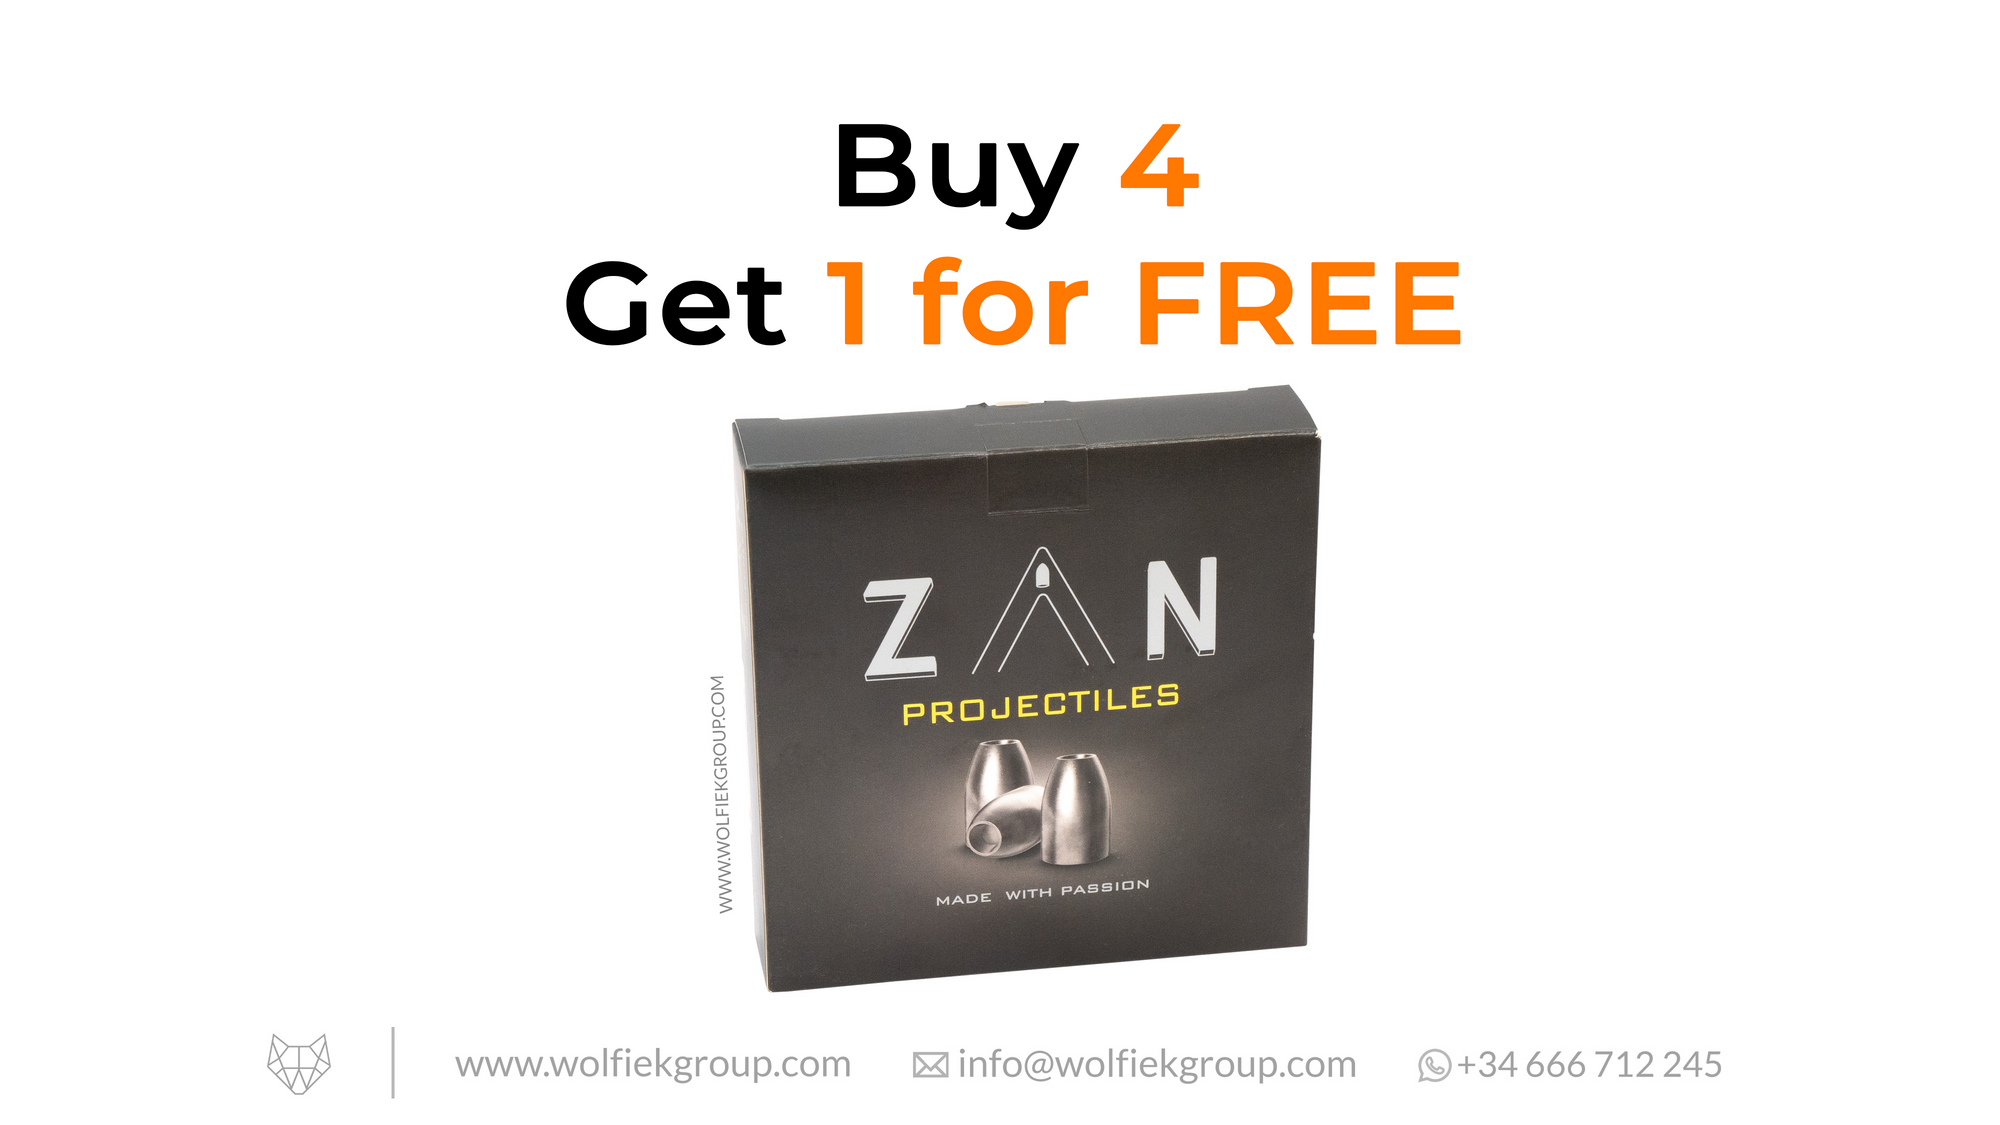 Zan Projectiles cal .250 buy 4 get 1 for free